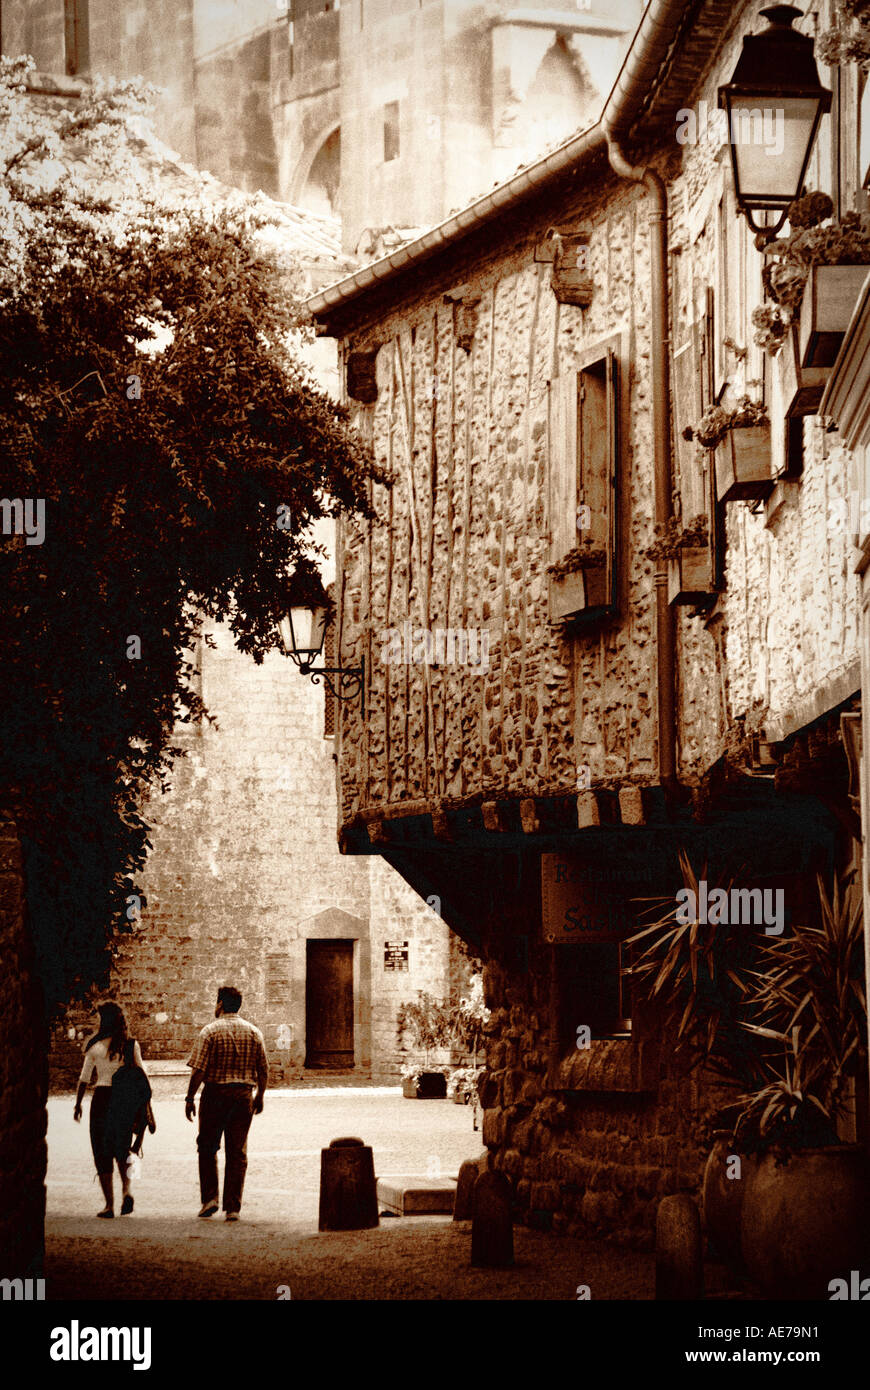 Carcassonne Languedoc Roussillon region of France Sepia lith effect Stock Photo